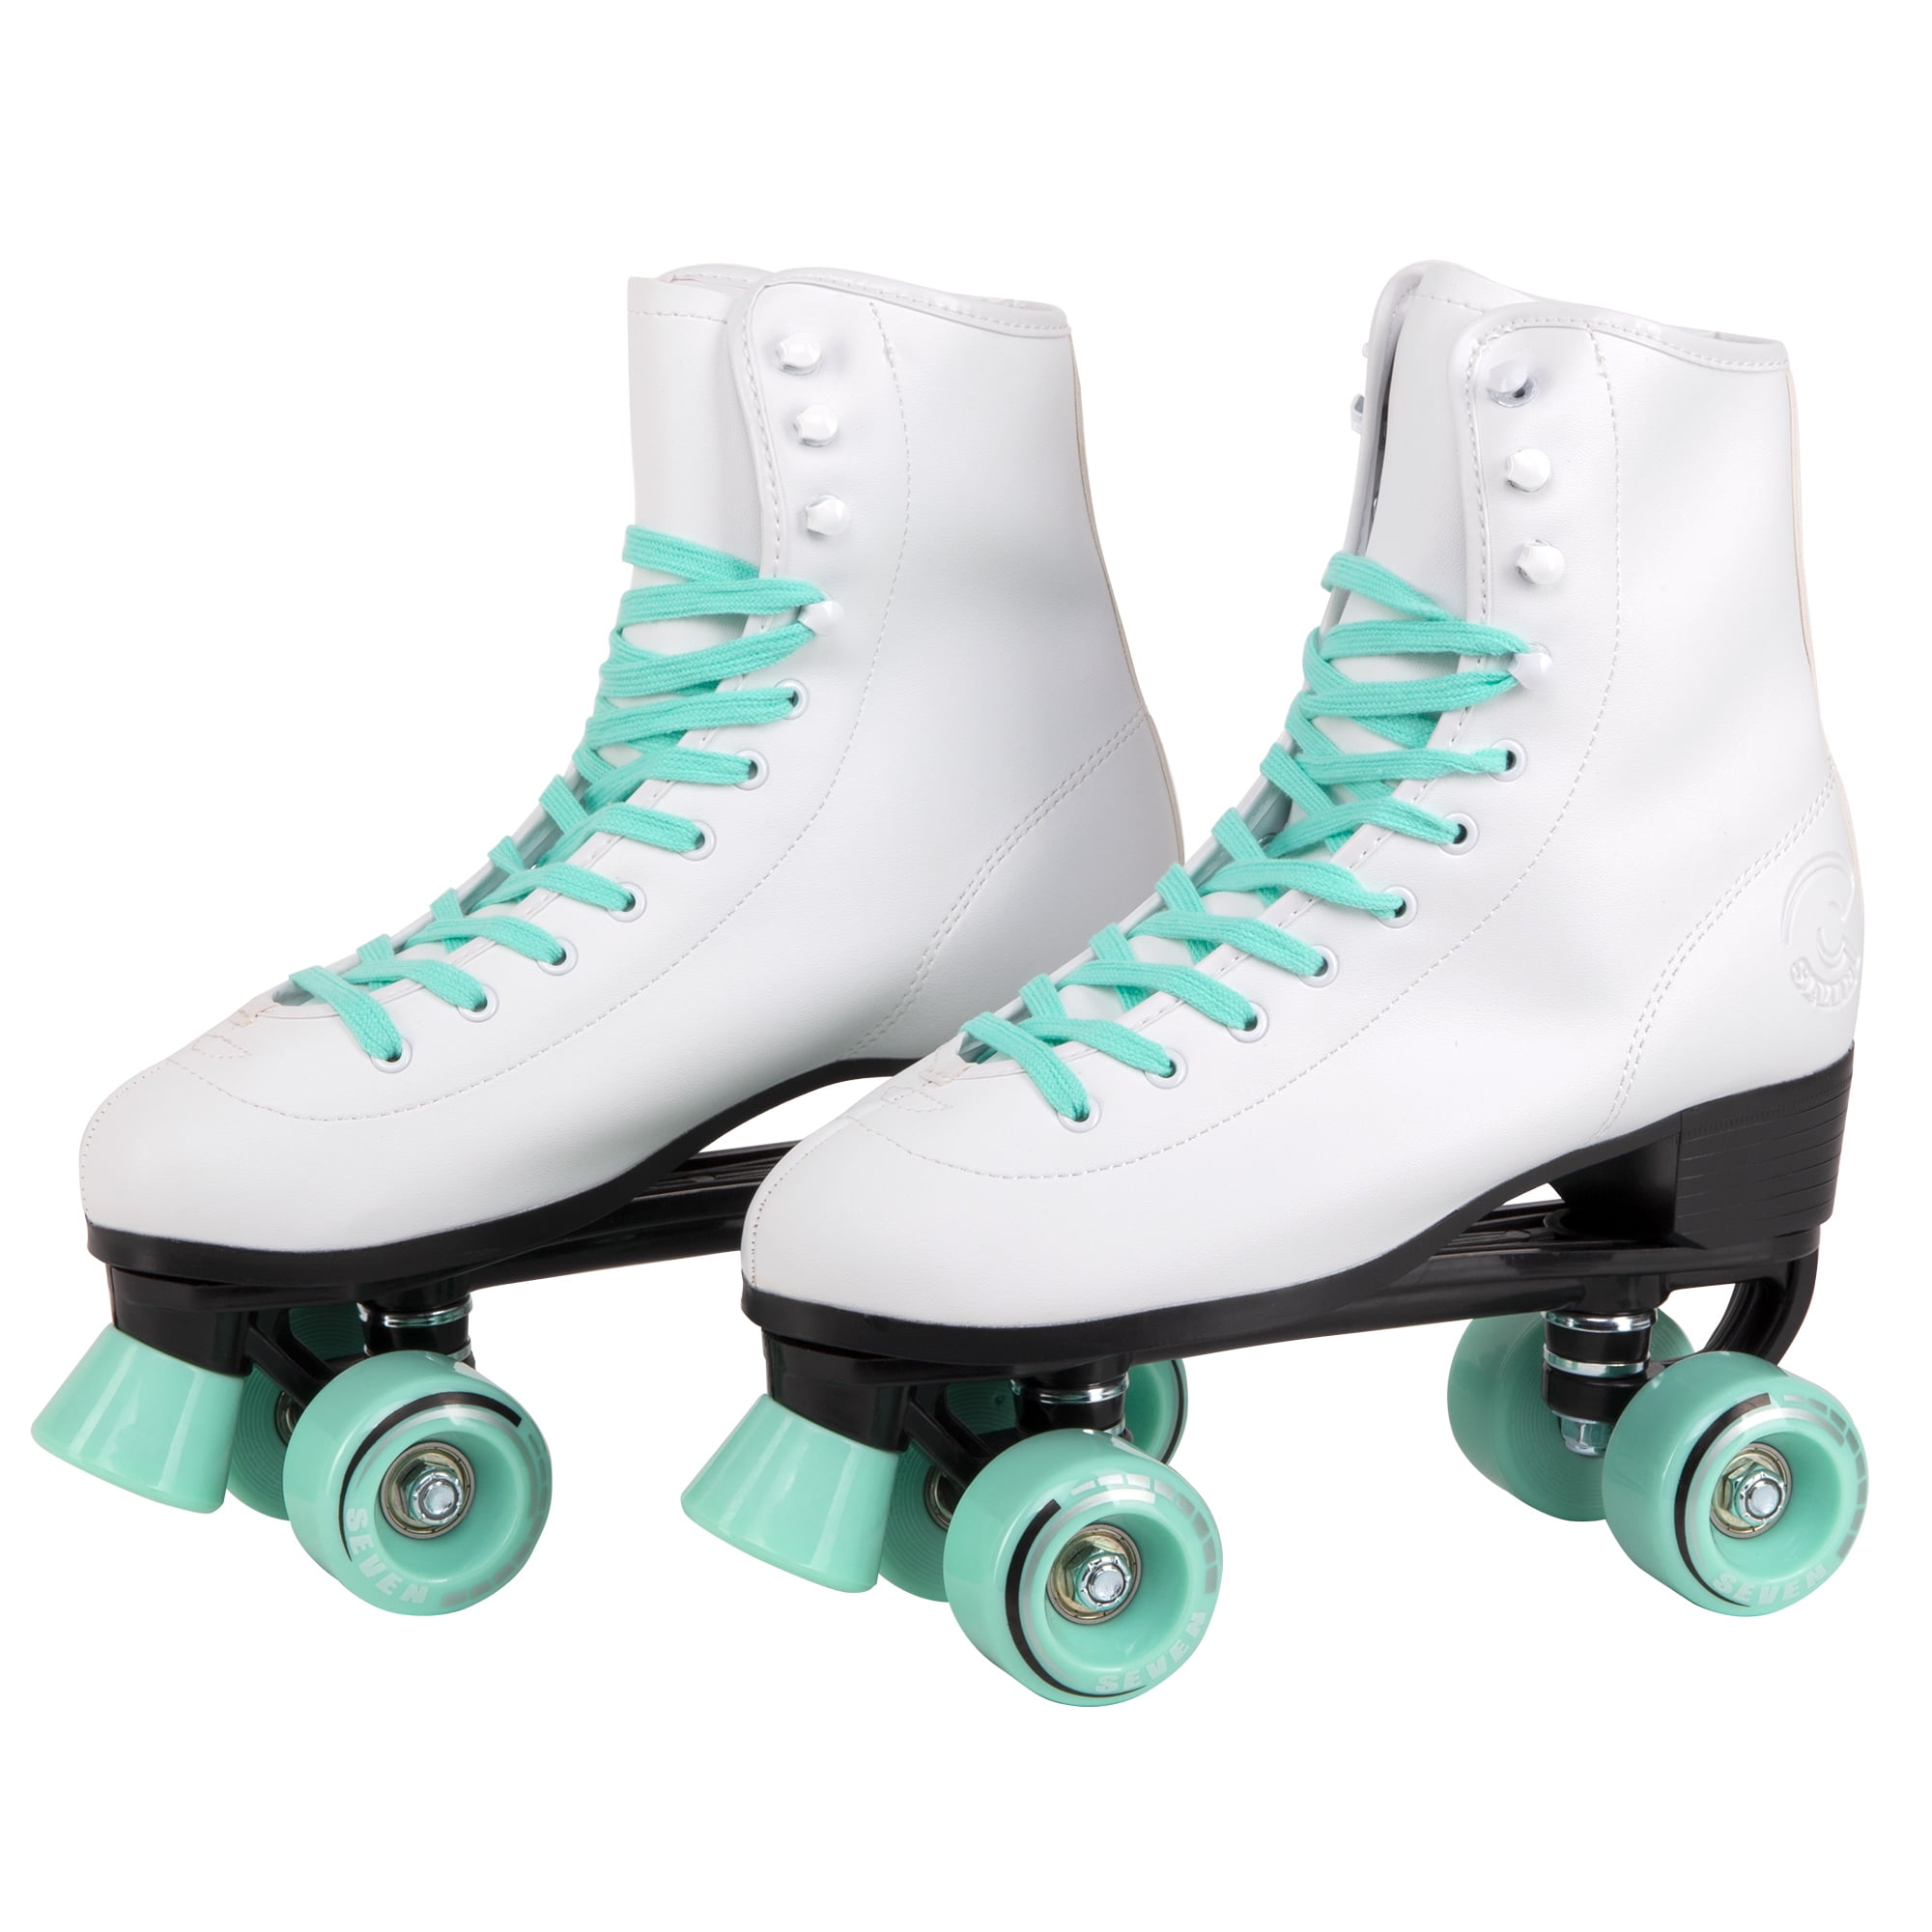 Womens Roller Skates,Faux Leather Roller Skates High-top Roller Skates Four-Wheel Roller Skates Shiny Roller Skates for Kids and Adults 